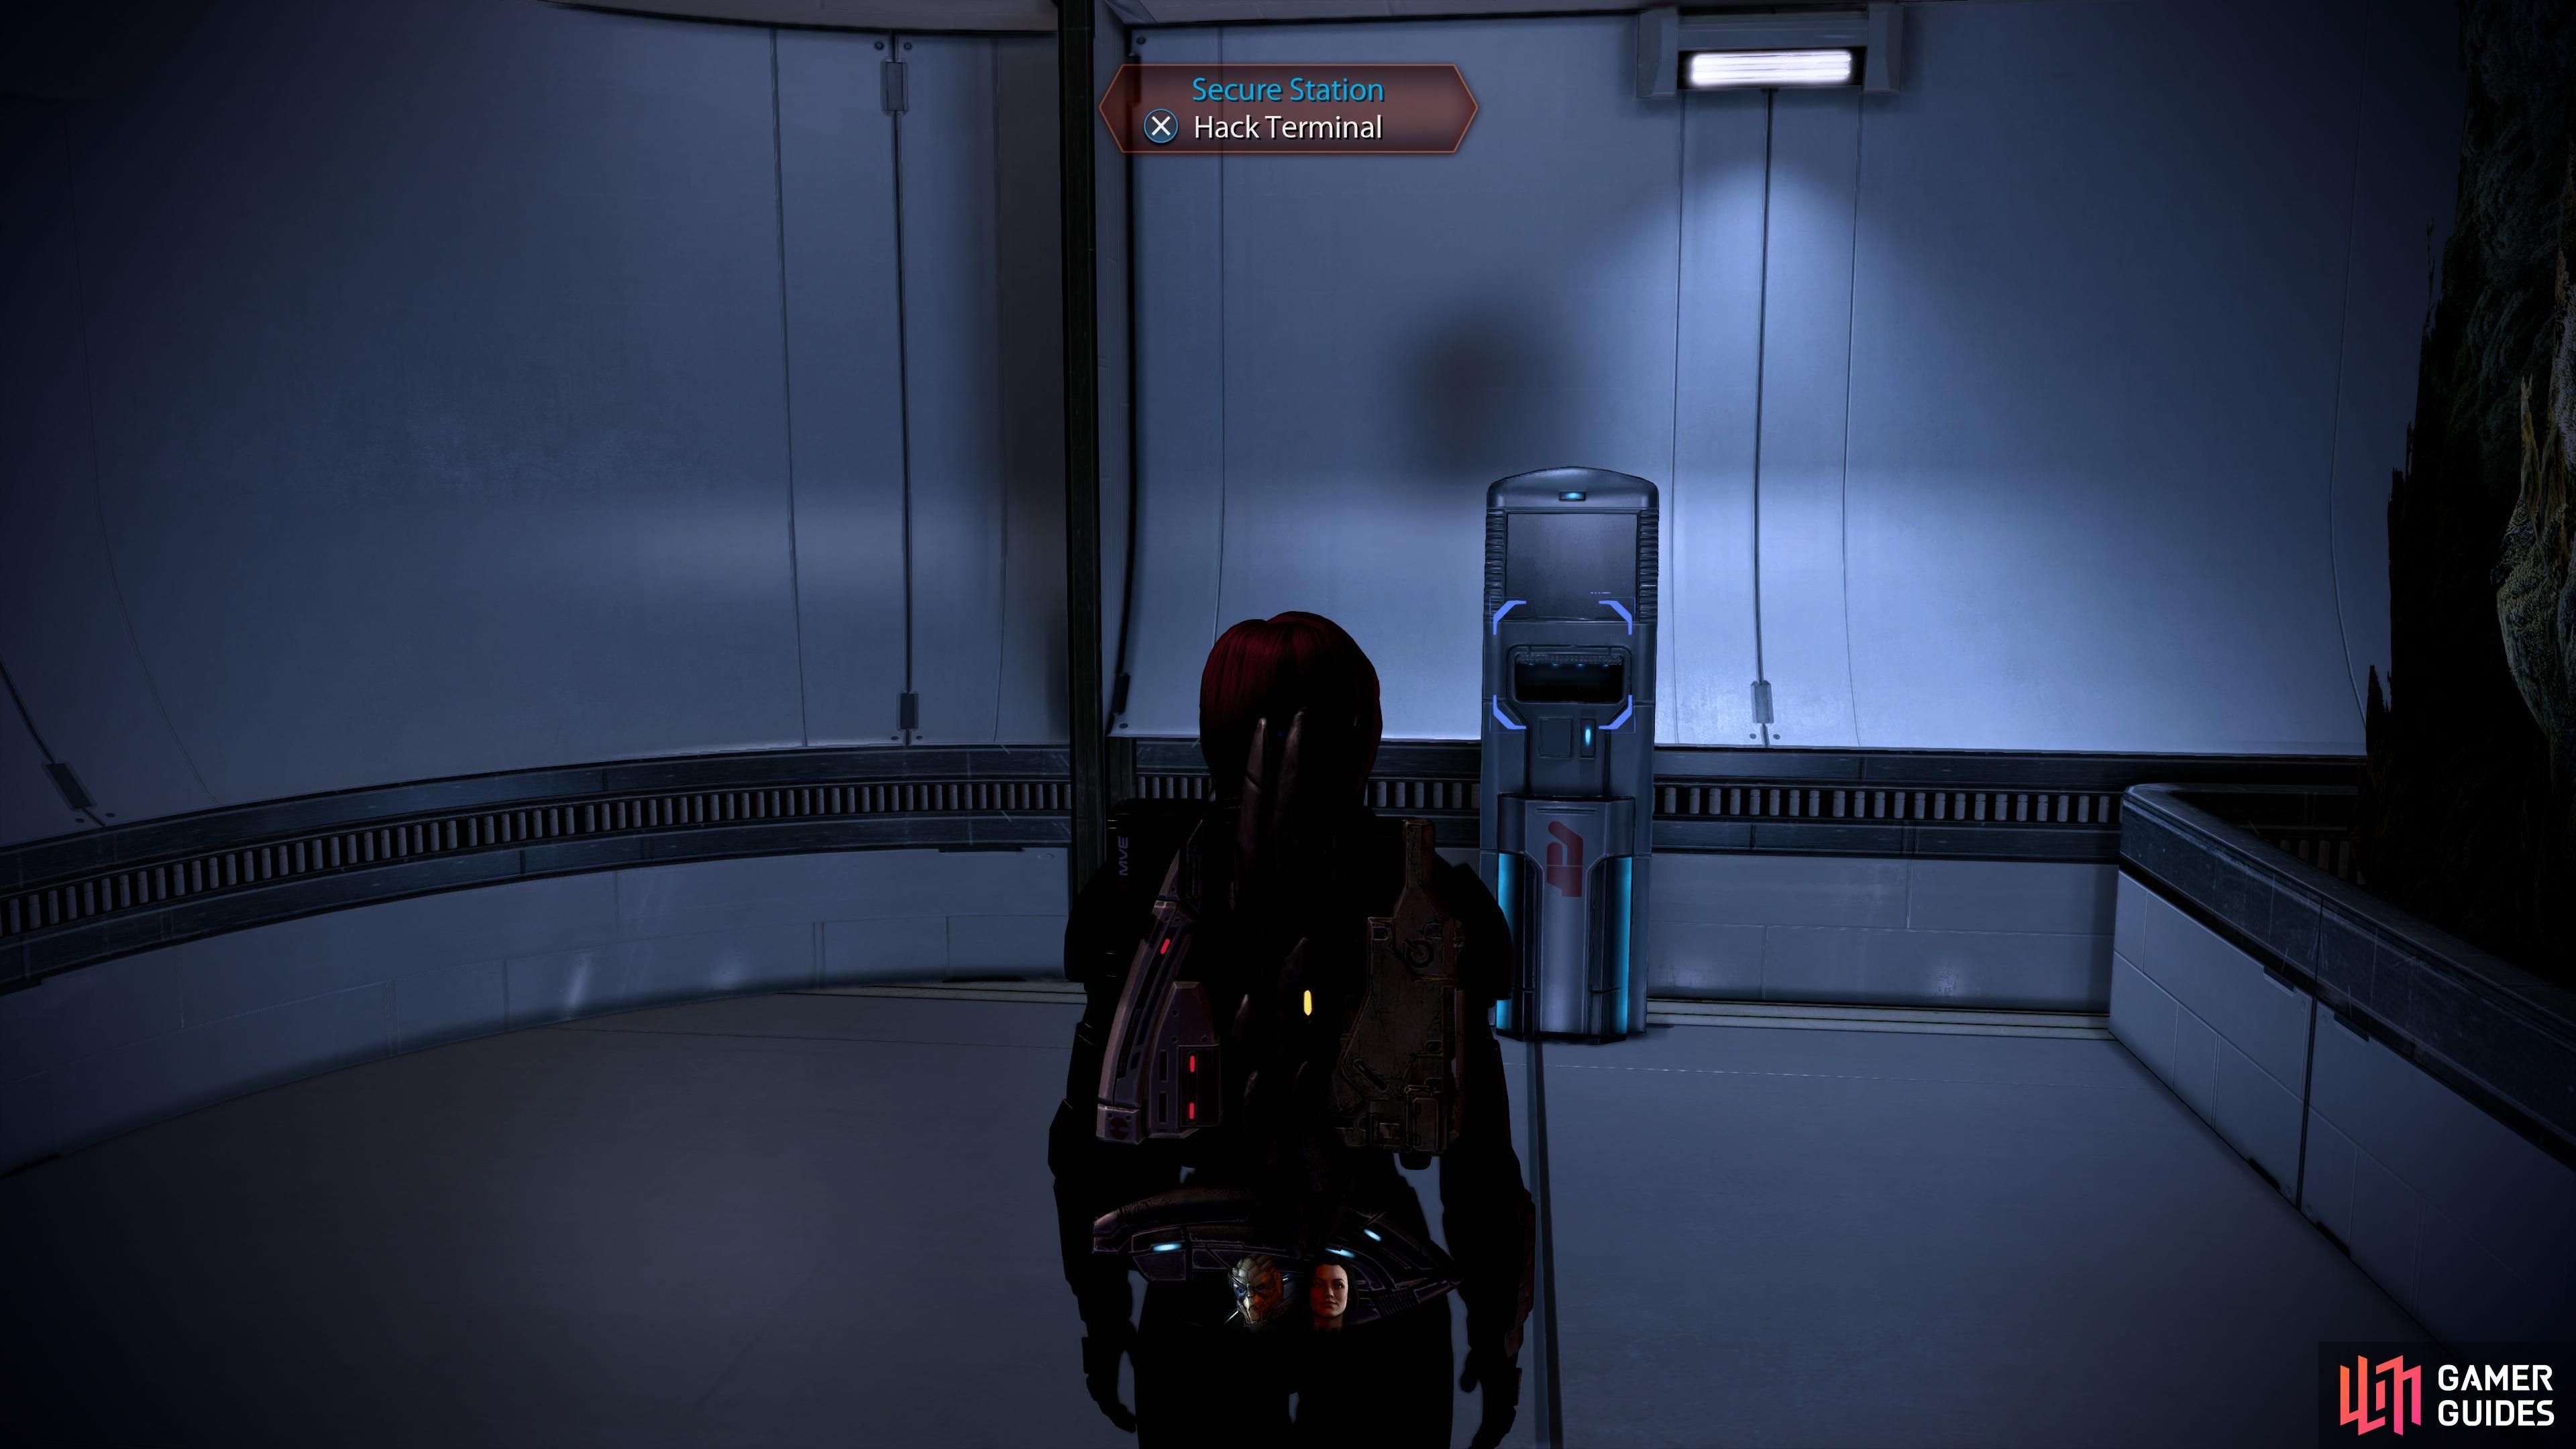 To appease Liara, you'll need to seek out several Secure Terminals,